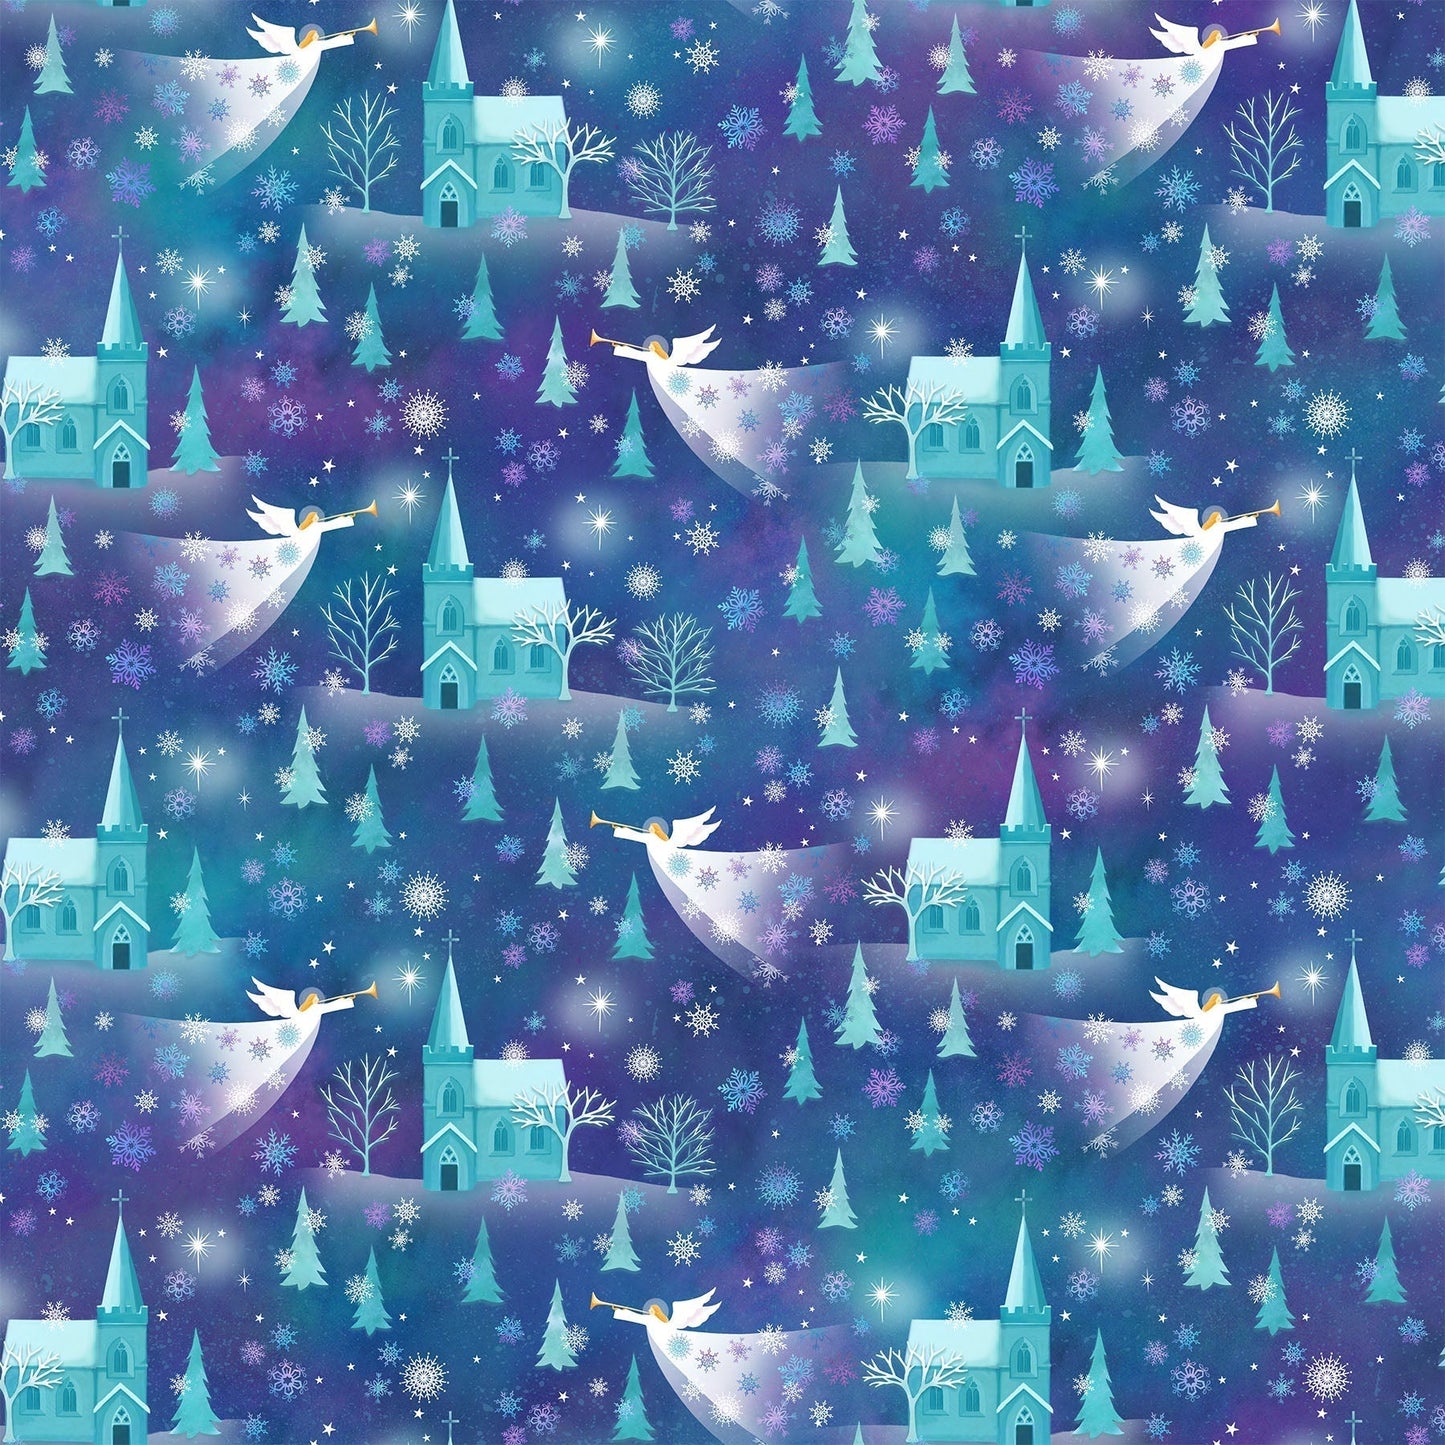 Northcott Fabric by the Yard 1/2 yard Angels on High Light Teal Multi (DP25356-62)